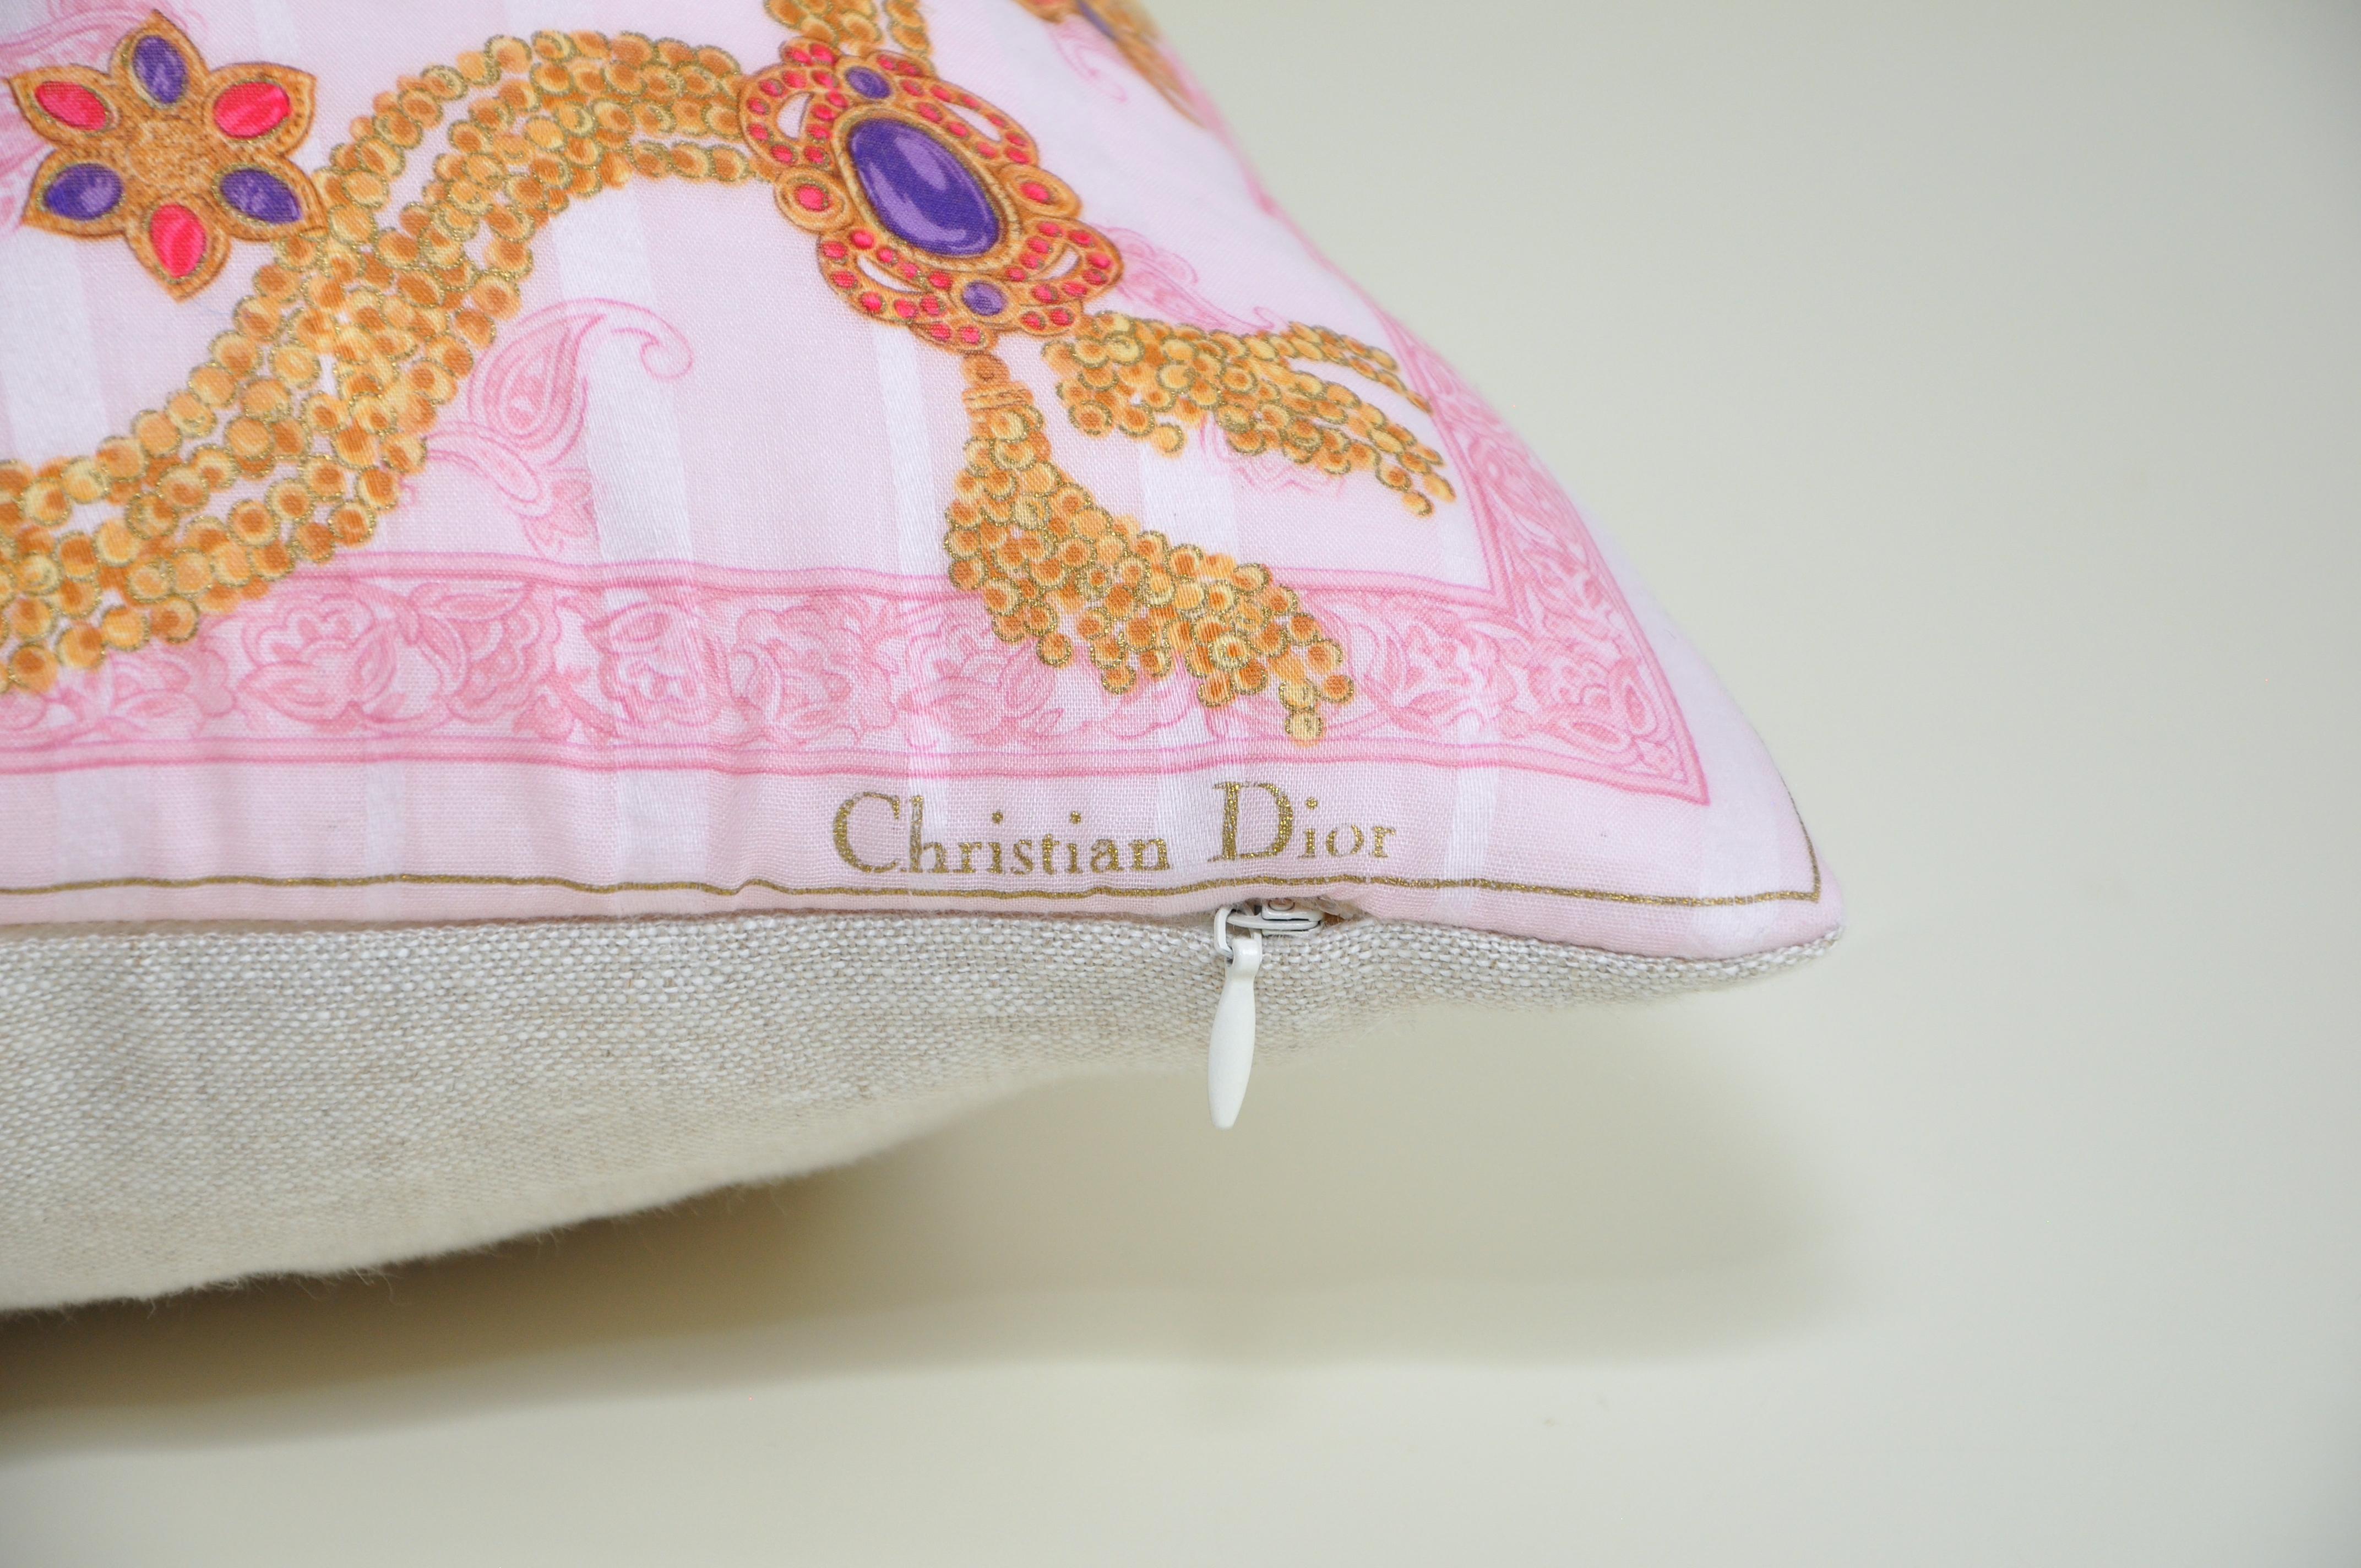 Title:
Katie Larmour vintage Christian Dior scarf backed in pure Irish Linen cushion pillow pink gold

This gem is a one-of-a-kind custom made luxury cushion (pillow) from an exquisite vintage Christian Dior fashion scarf in a very unique and